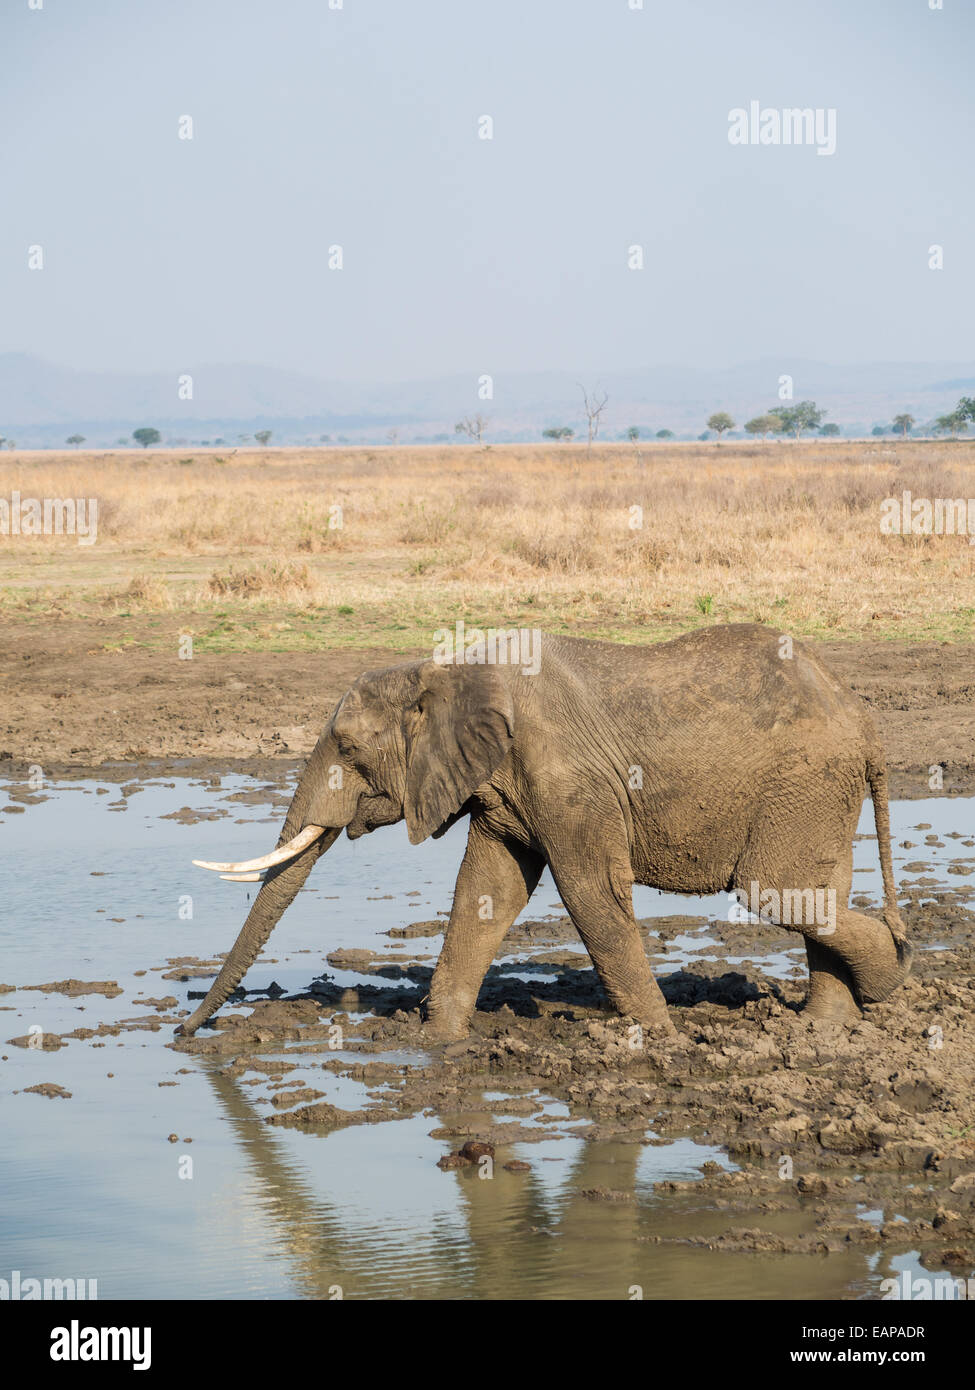 Vertical photo of an adult male elephant with canines drinking water on the savanna in a national park in Tanzania, Africa. Stock Photo